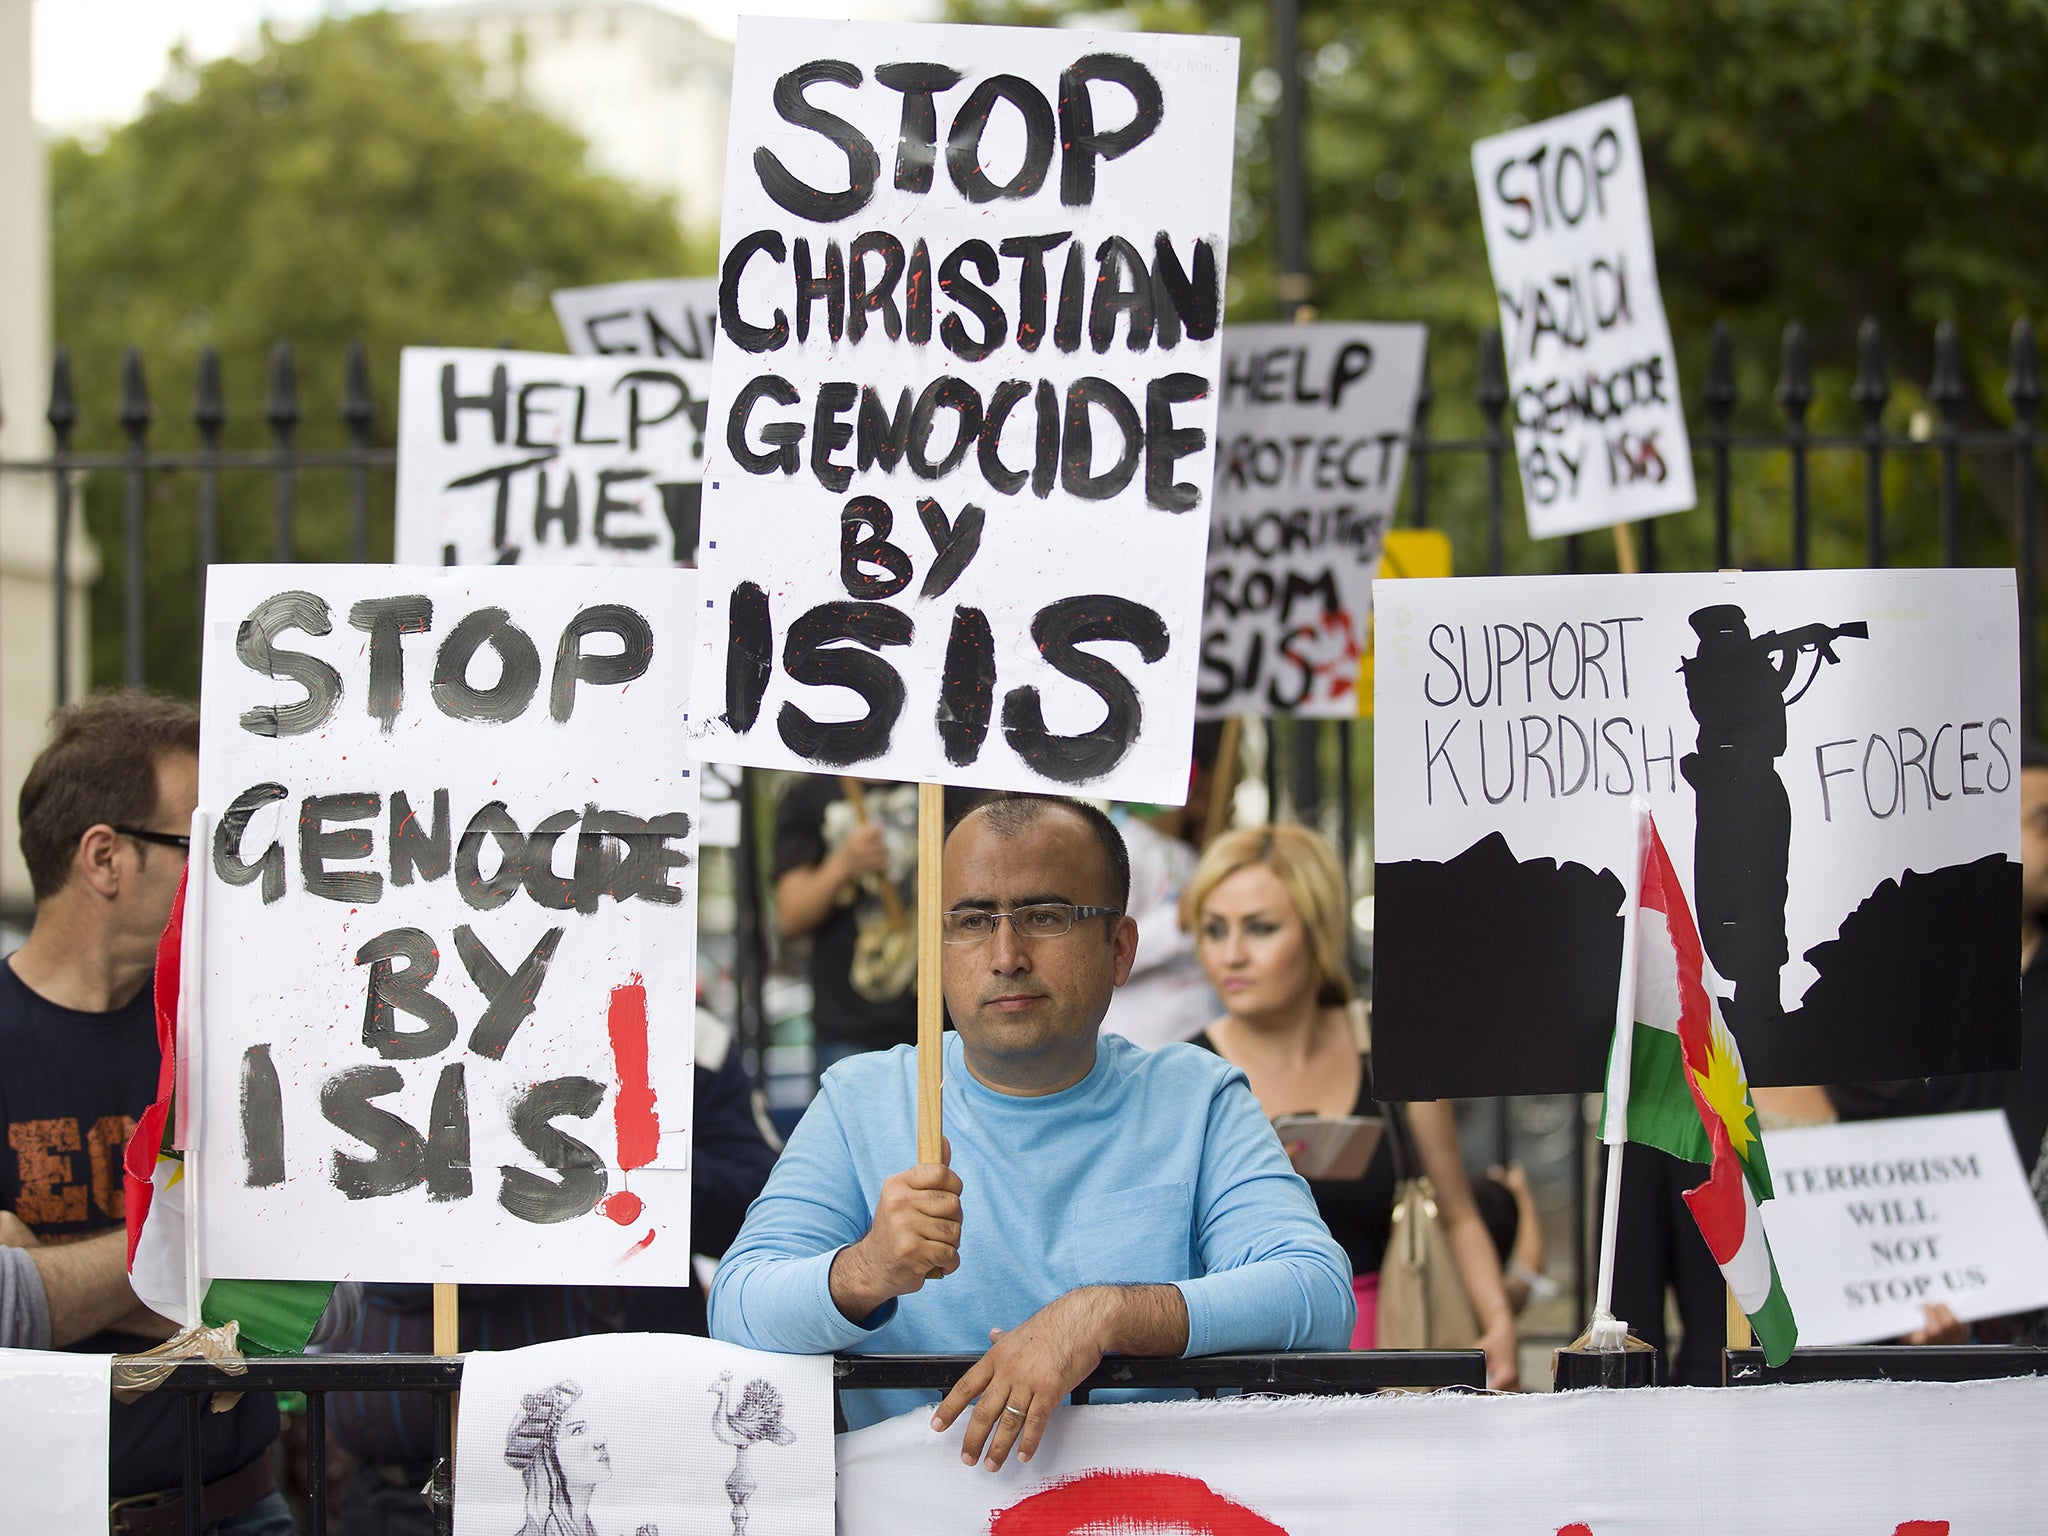 A protest in demonstration against the killing of Yazidis by Islamic State outside Downing Street last year. The government has indicated that it is considering calling for a vote on military action in Syria.